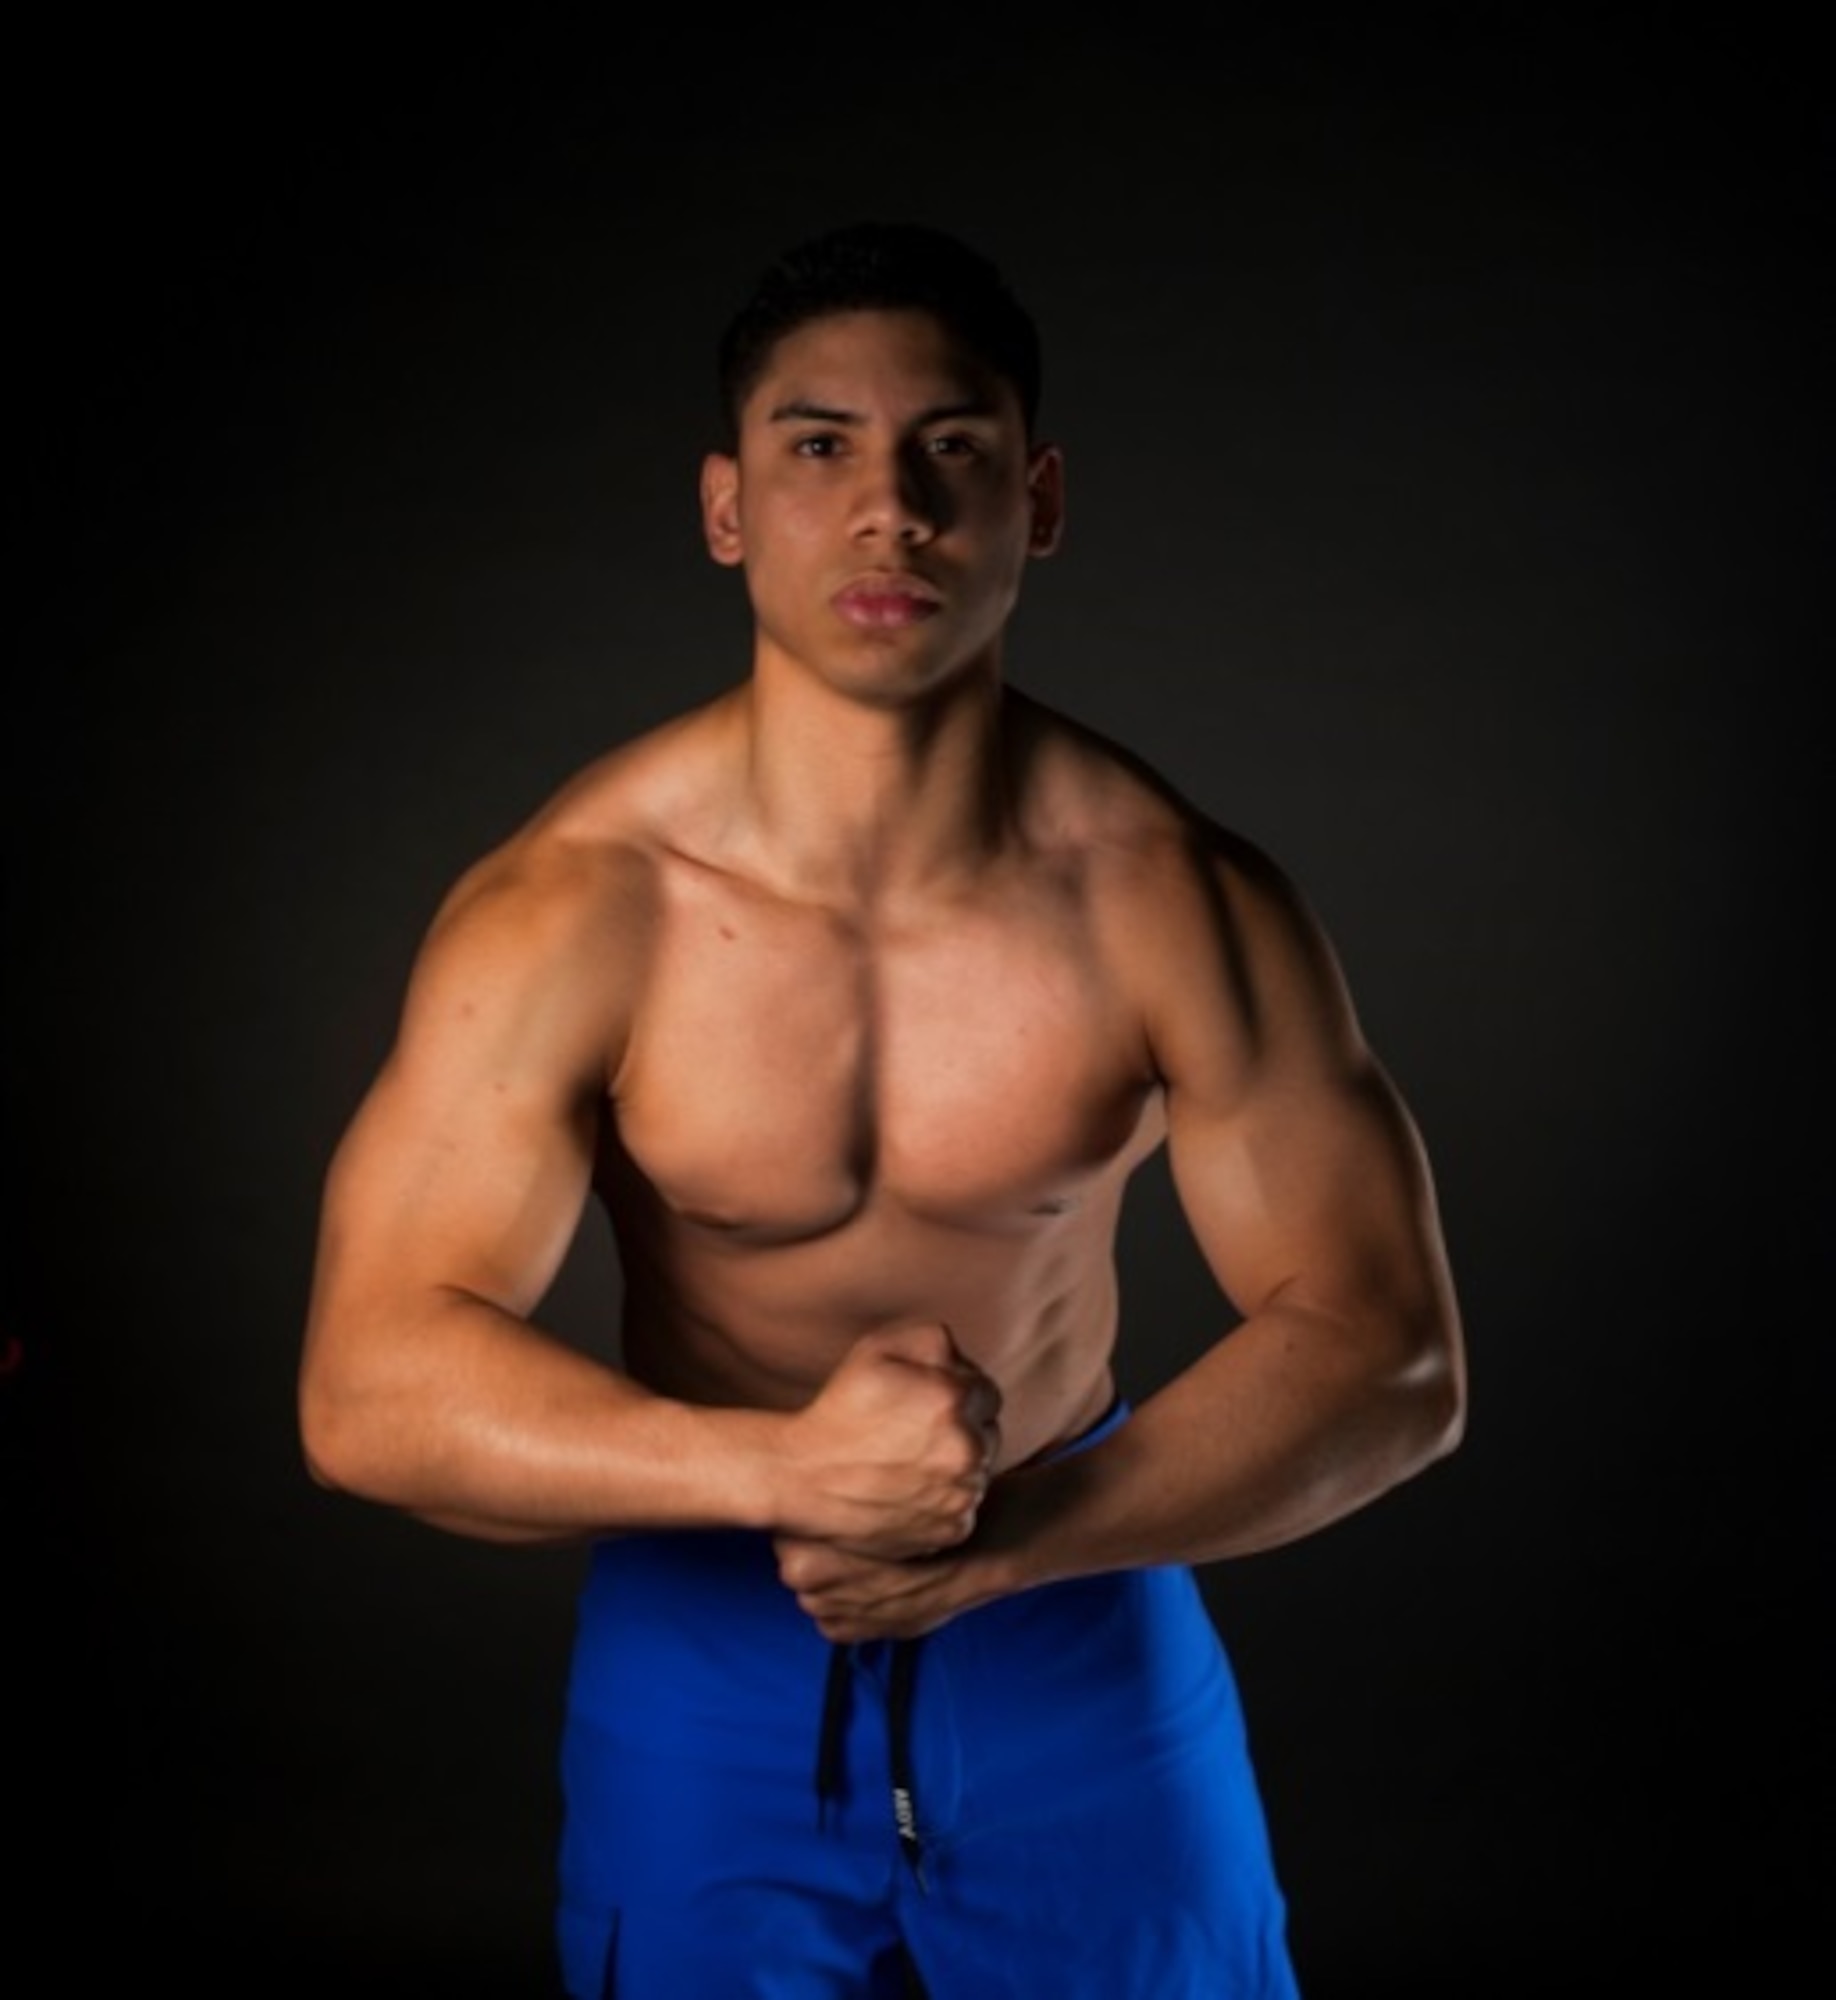 Senior Airman Miguel Amador, 5th Medical Group medical information service technician, flexes his muscles at Minot Air Force Base, N.D., Aug. 11, 2015. Amador has begun training for his next bodybuilding competition, which begins in October. (U.S. Air Force photo/Airman 1st Class Christian Sullivan) 